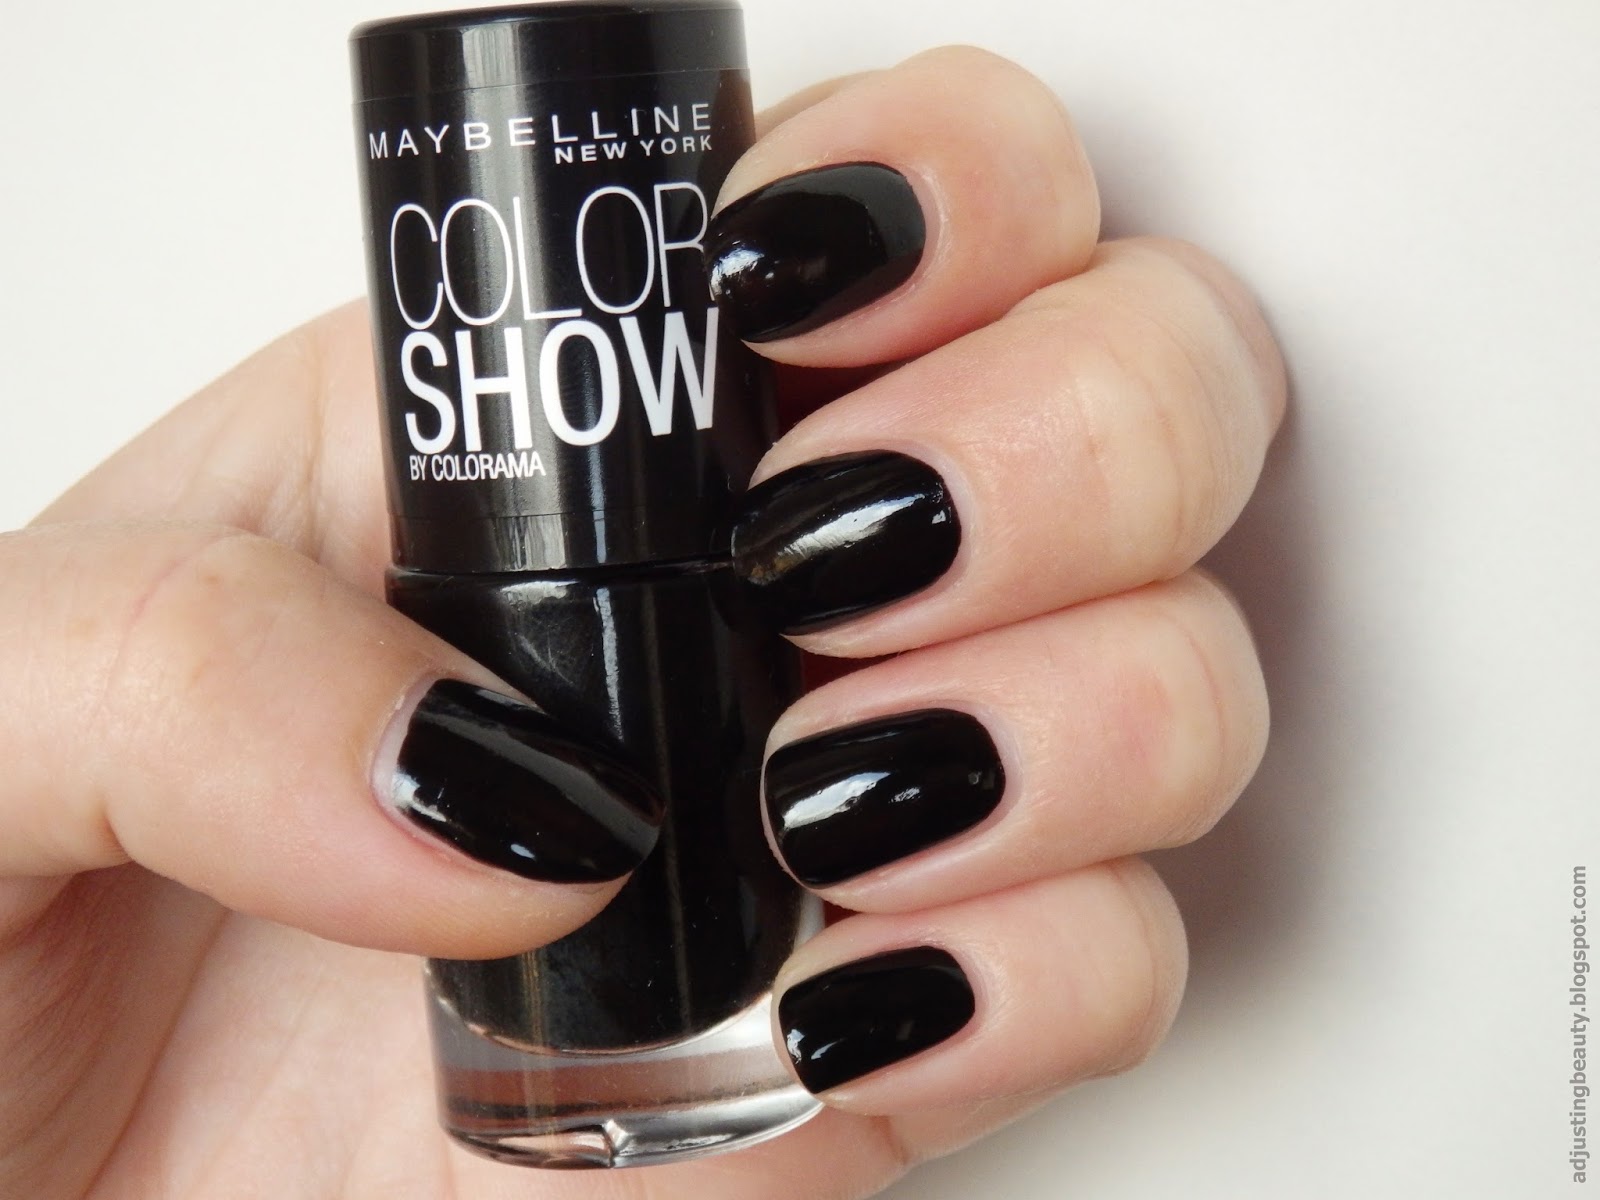 Maybelline Color Show Nail Polish - wide 4